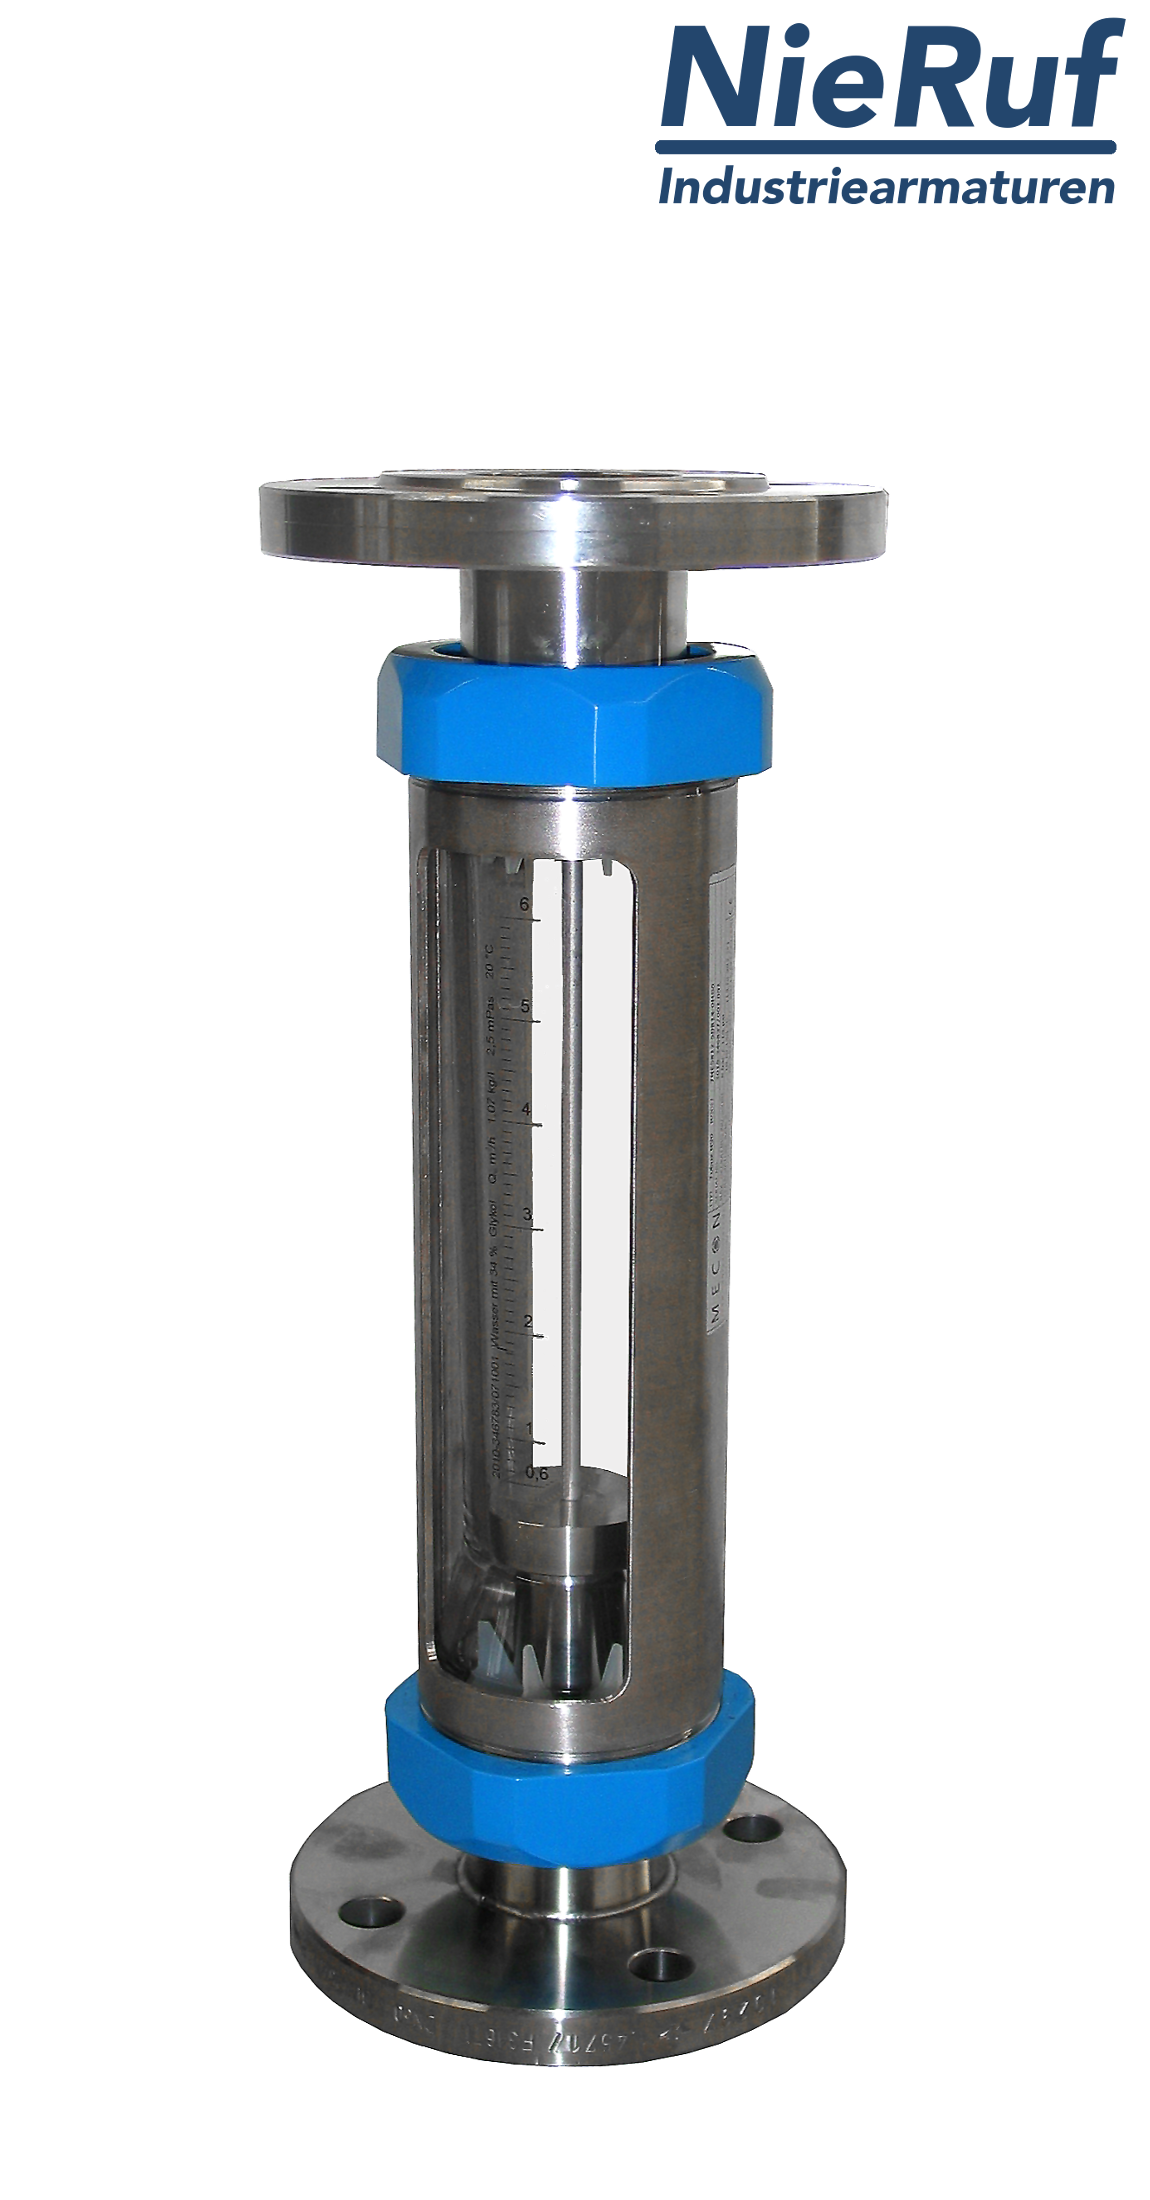 Variable area flowmeter stainless steel + borosilicate flange DN40 300.0 - 3000 l/h water FKM